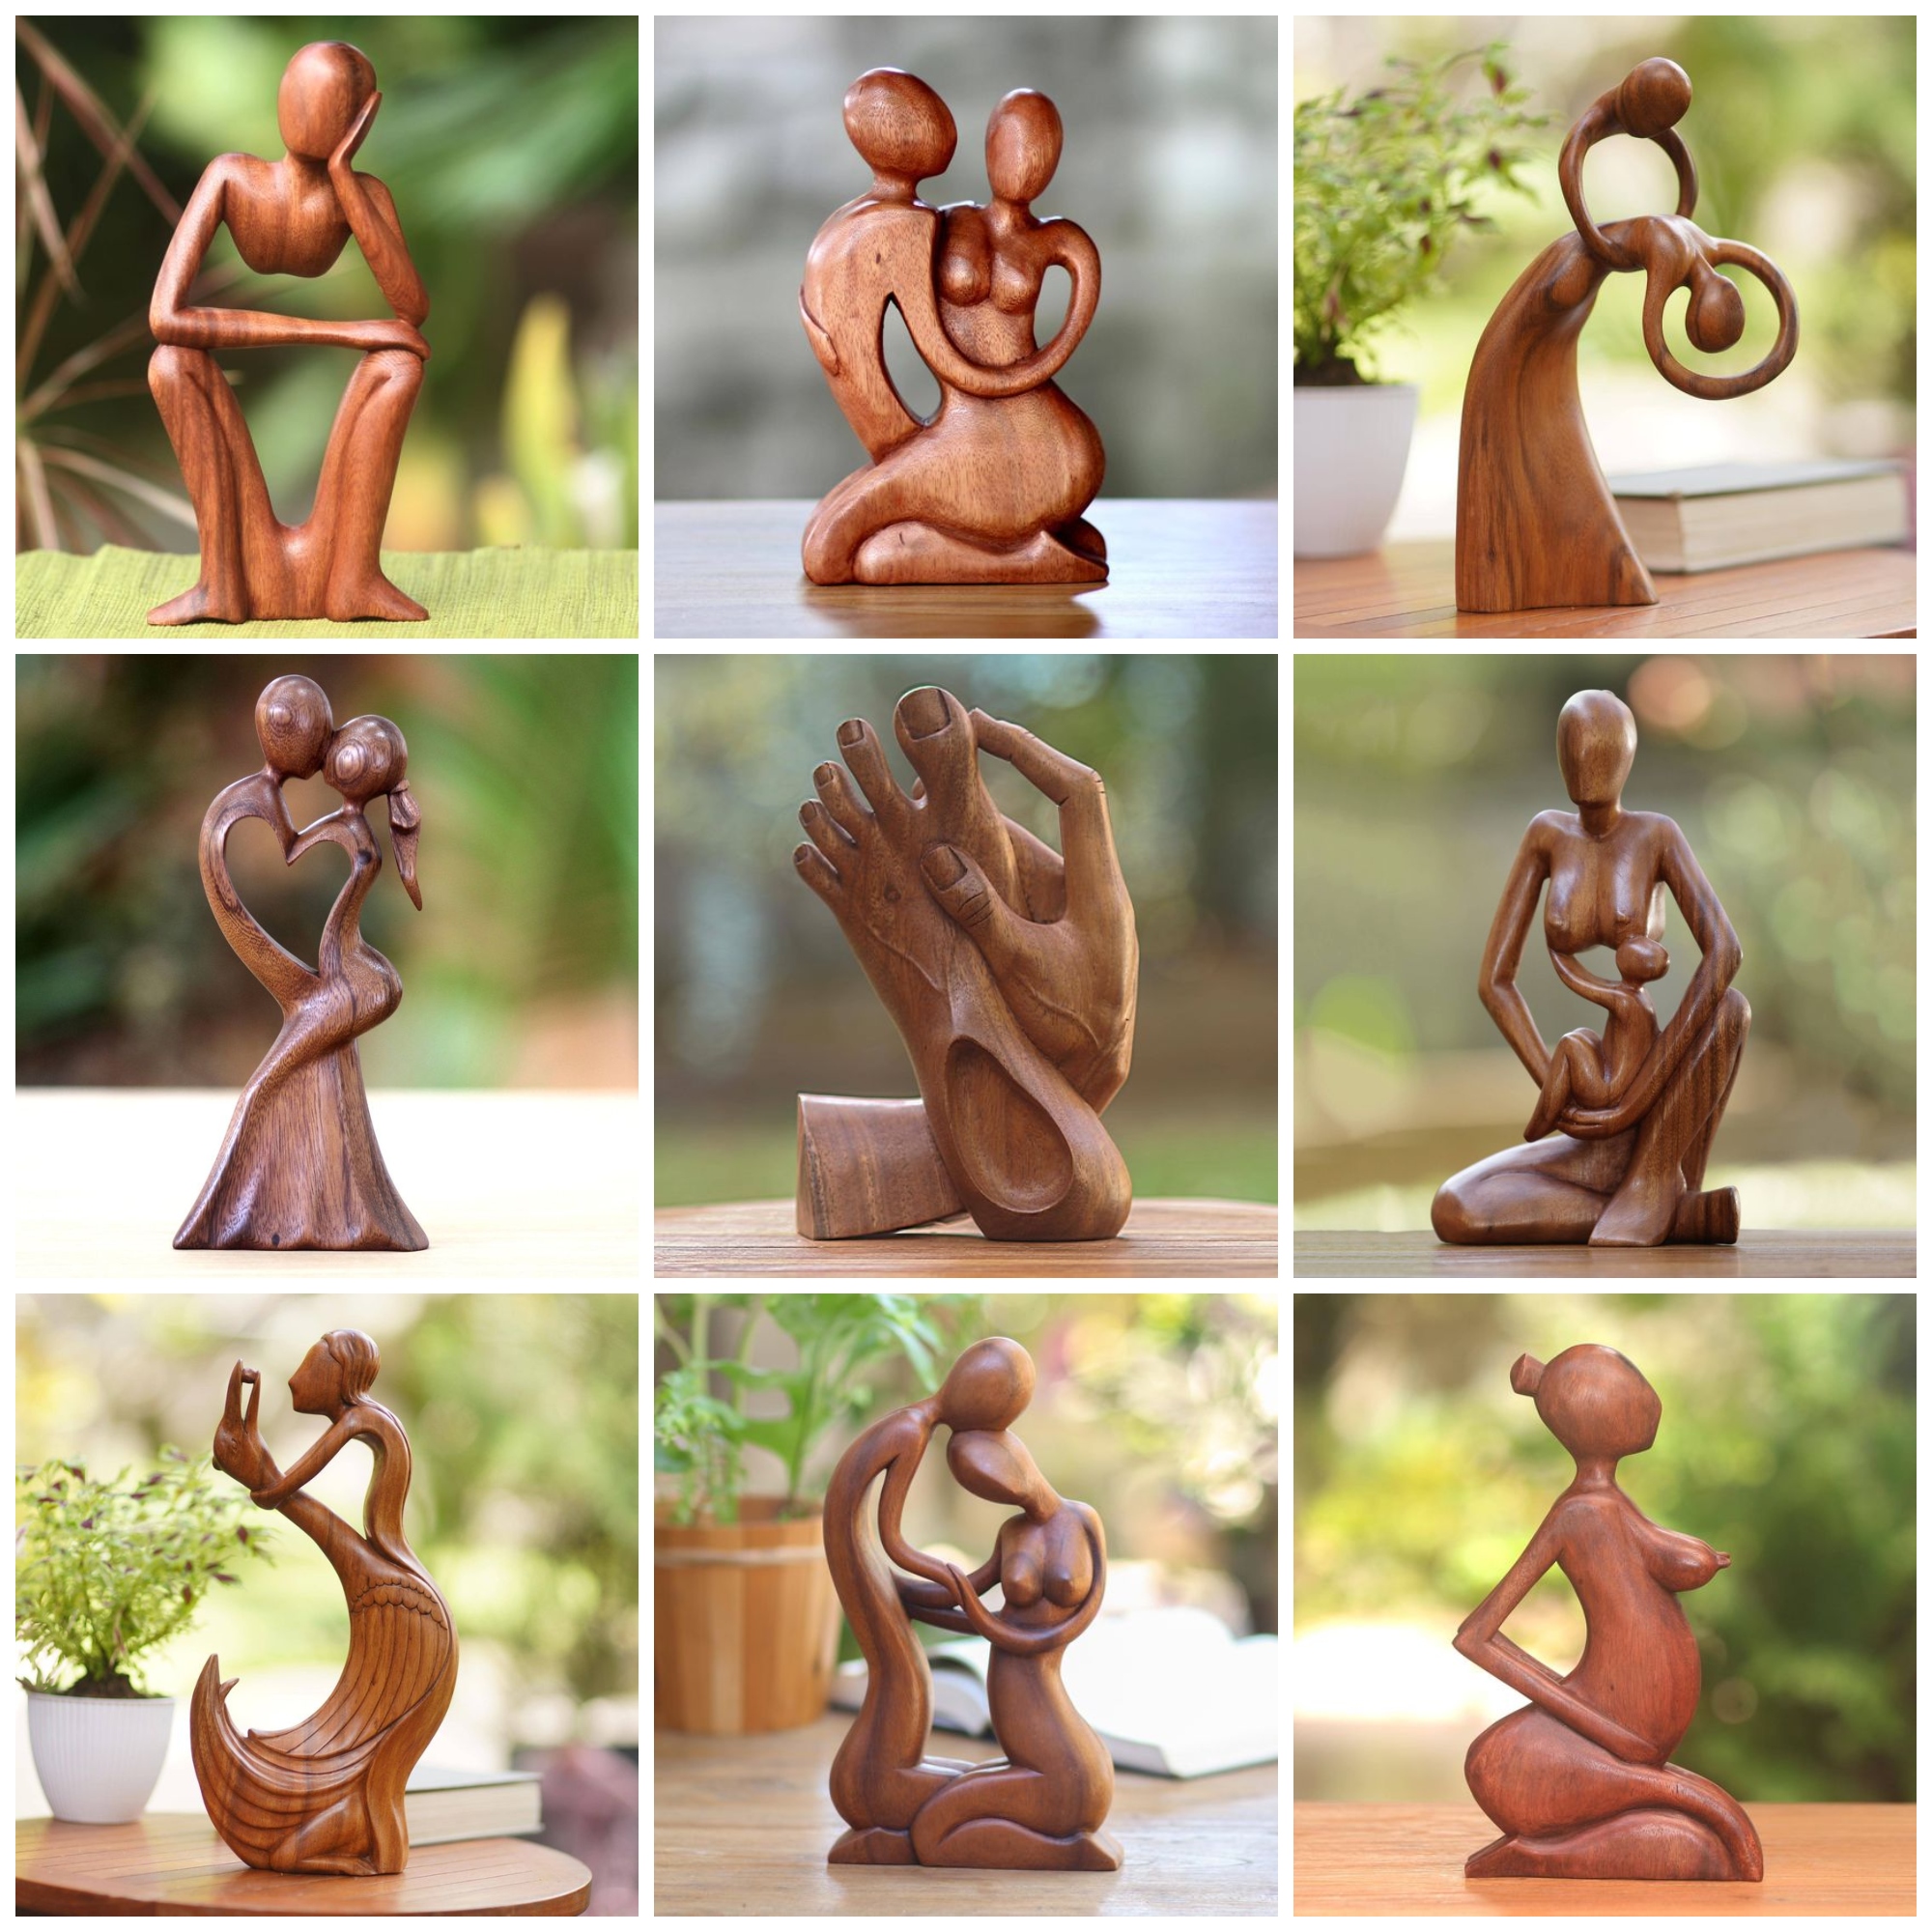 Simple ideas for wood carving projects  for your lockdown